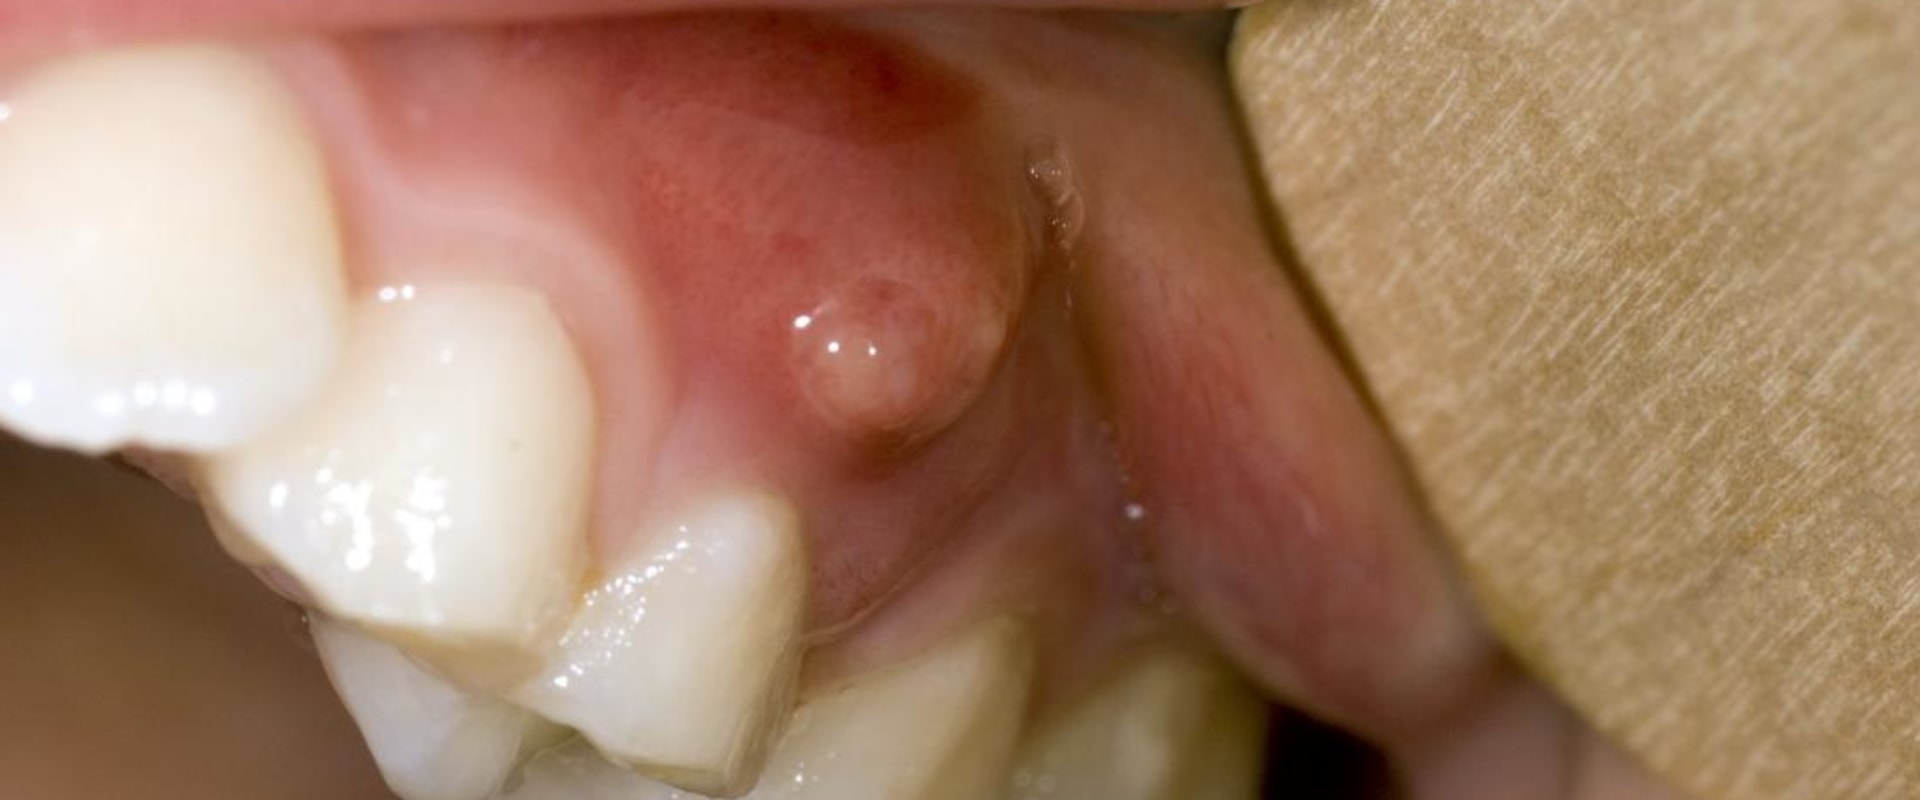 How to Treat and Prevent Gum Infection